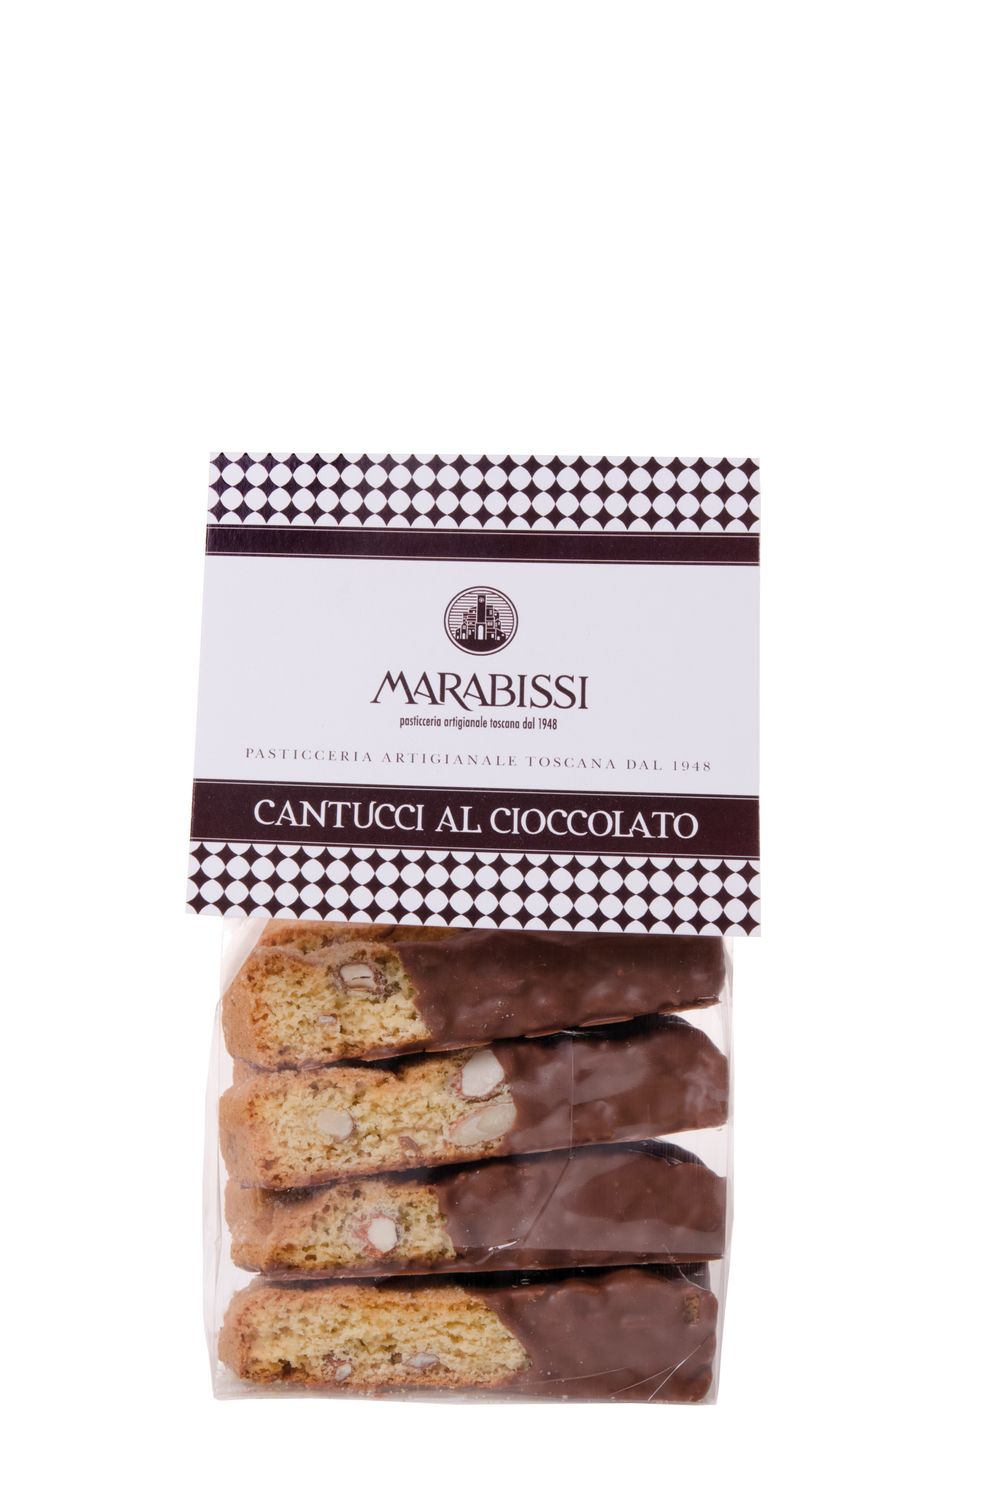 Cantucci Chocolate Dipped with Almonds